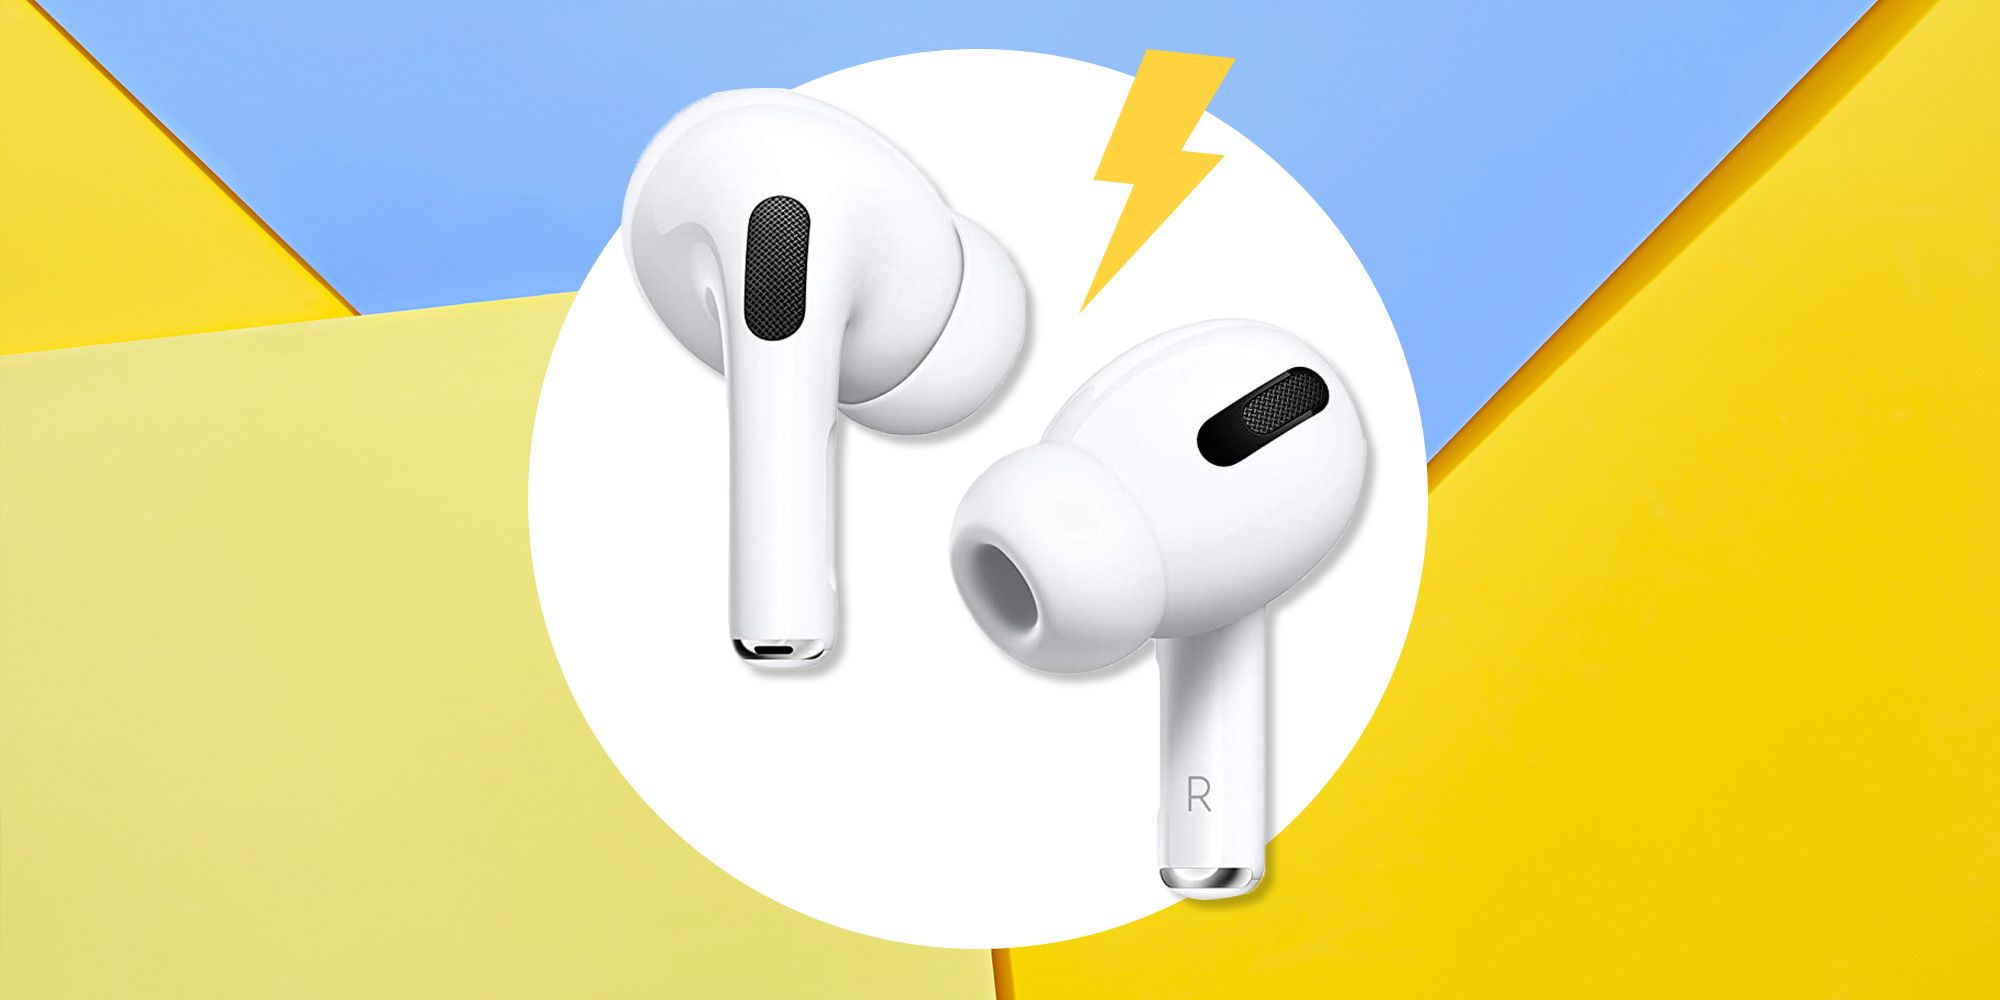 Apple AirPods Pro Amazon Prime Day Sale: Get 30% Off Right Now